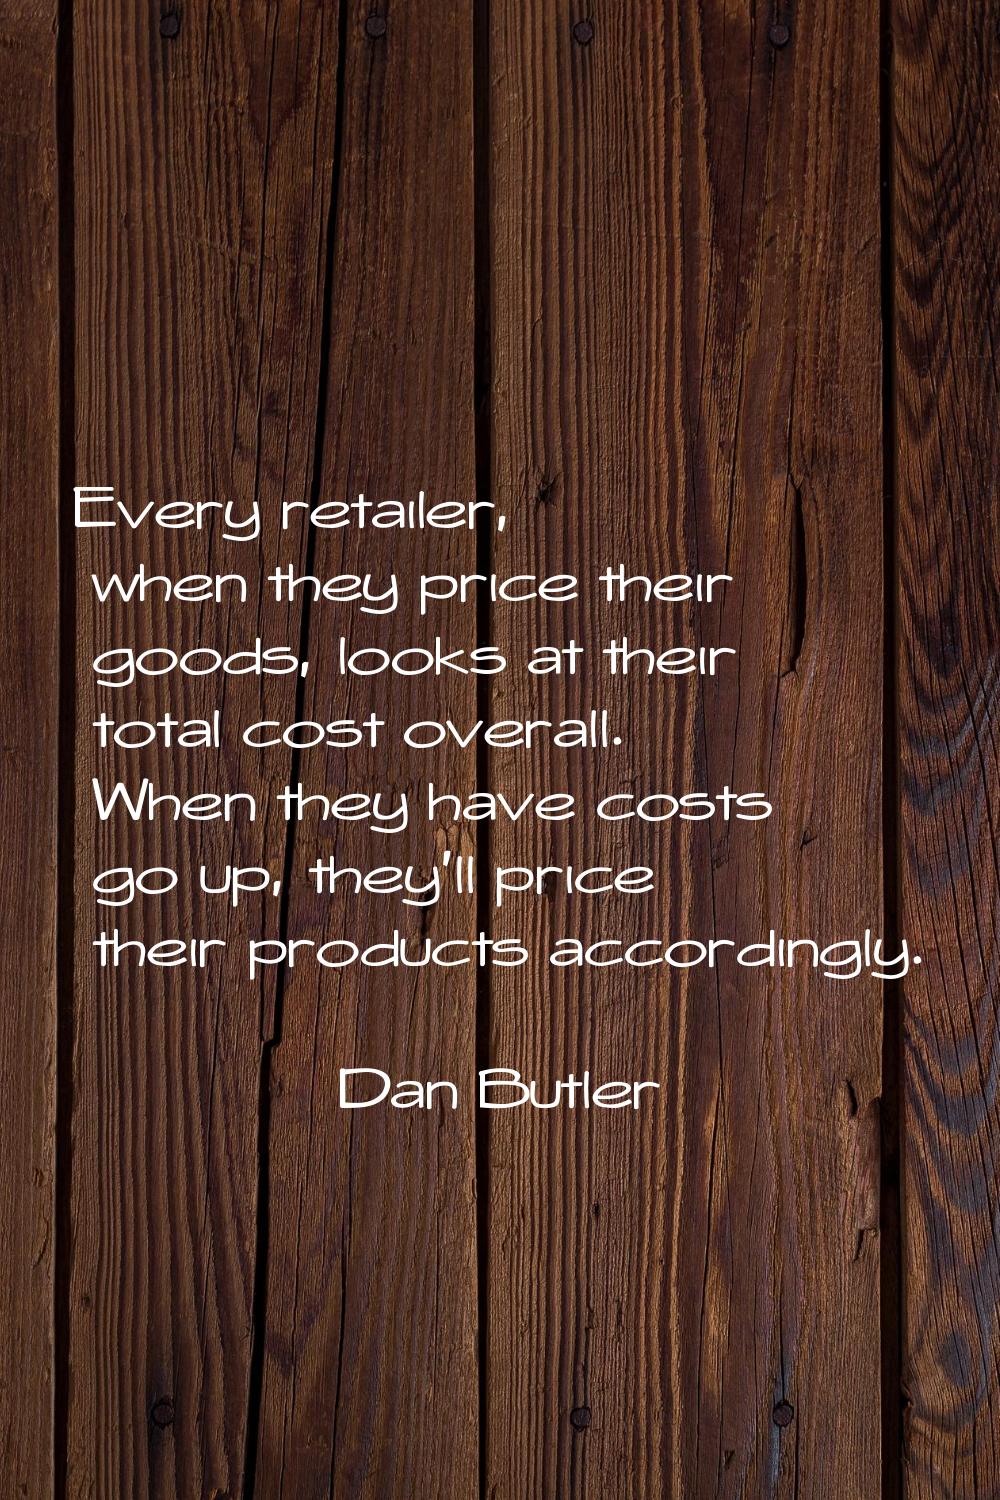 Every retailer, when they price their goods, looks at their total cost overall. When they have cost